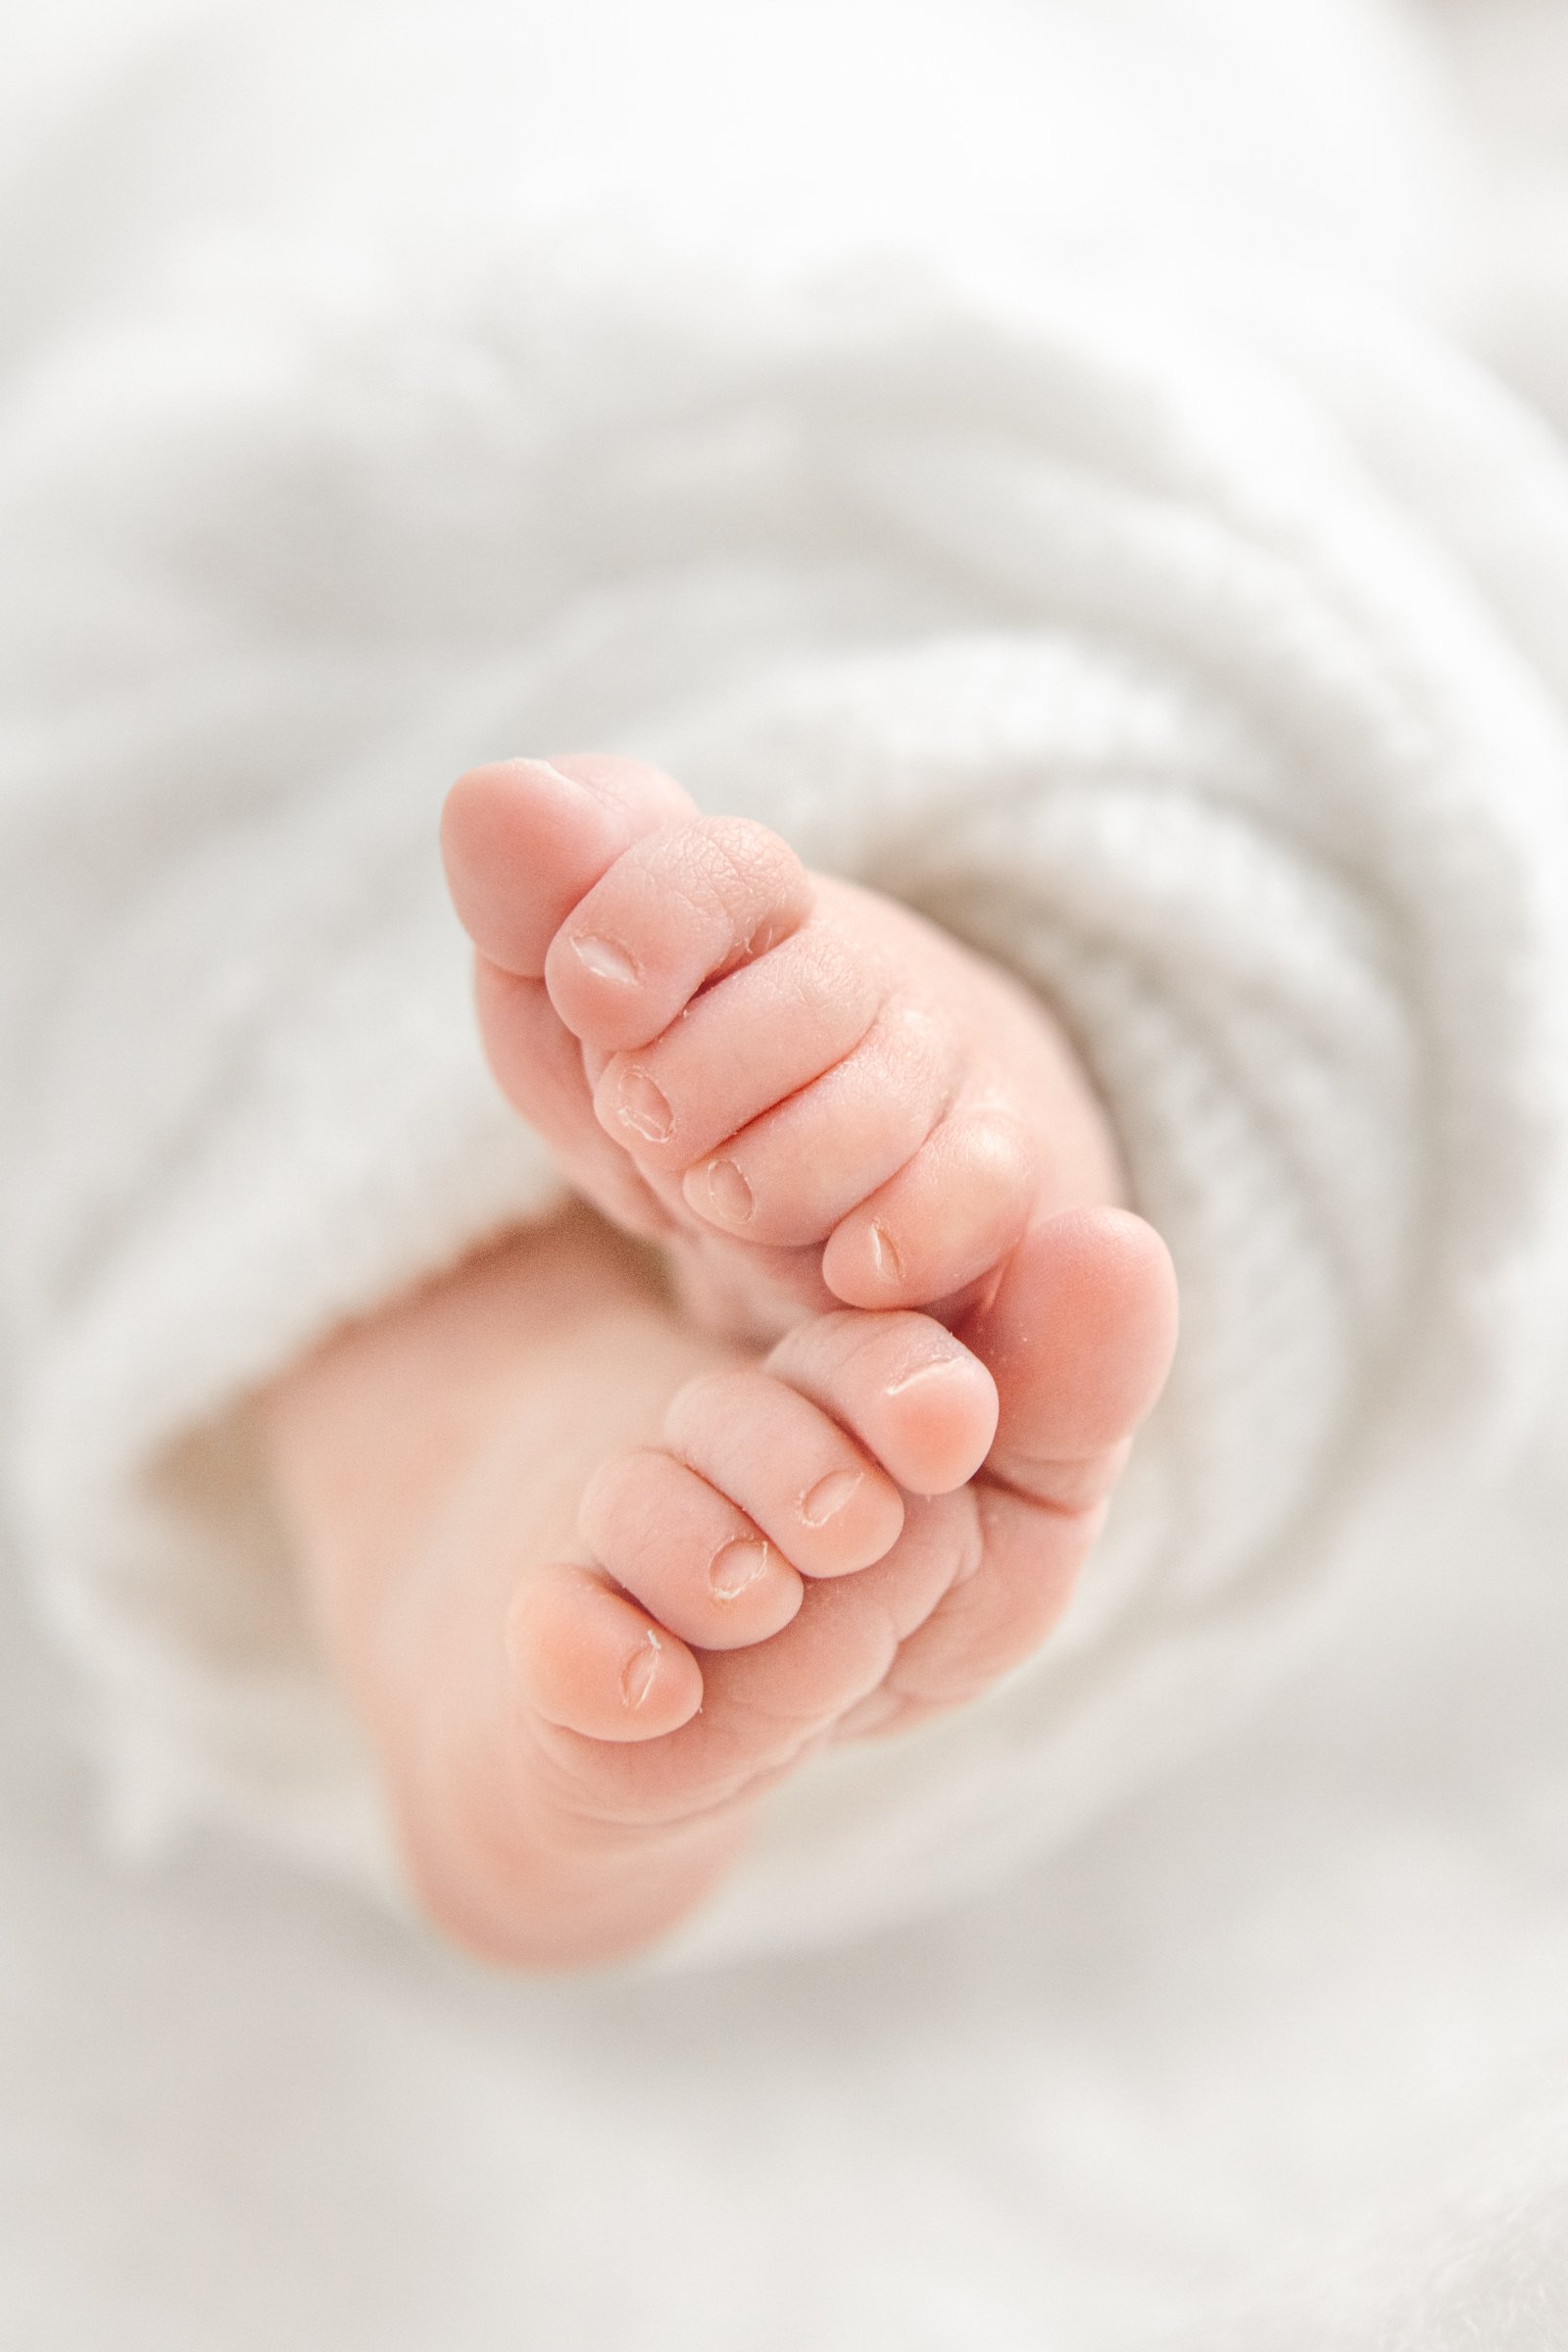  Baby feet close-up picture with sweet little toes by professional newborn photographer Nicole Hawkins Photography in Hoboken, New Jersey.  baby feet photo baby toes sweet baby feet detailed baby photos #nicolehawkinsphotography #nicolehawkinsnewborn